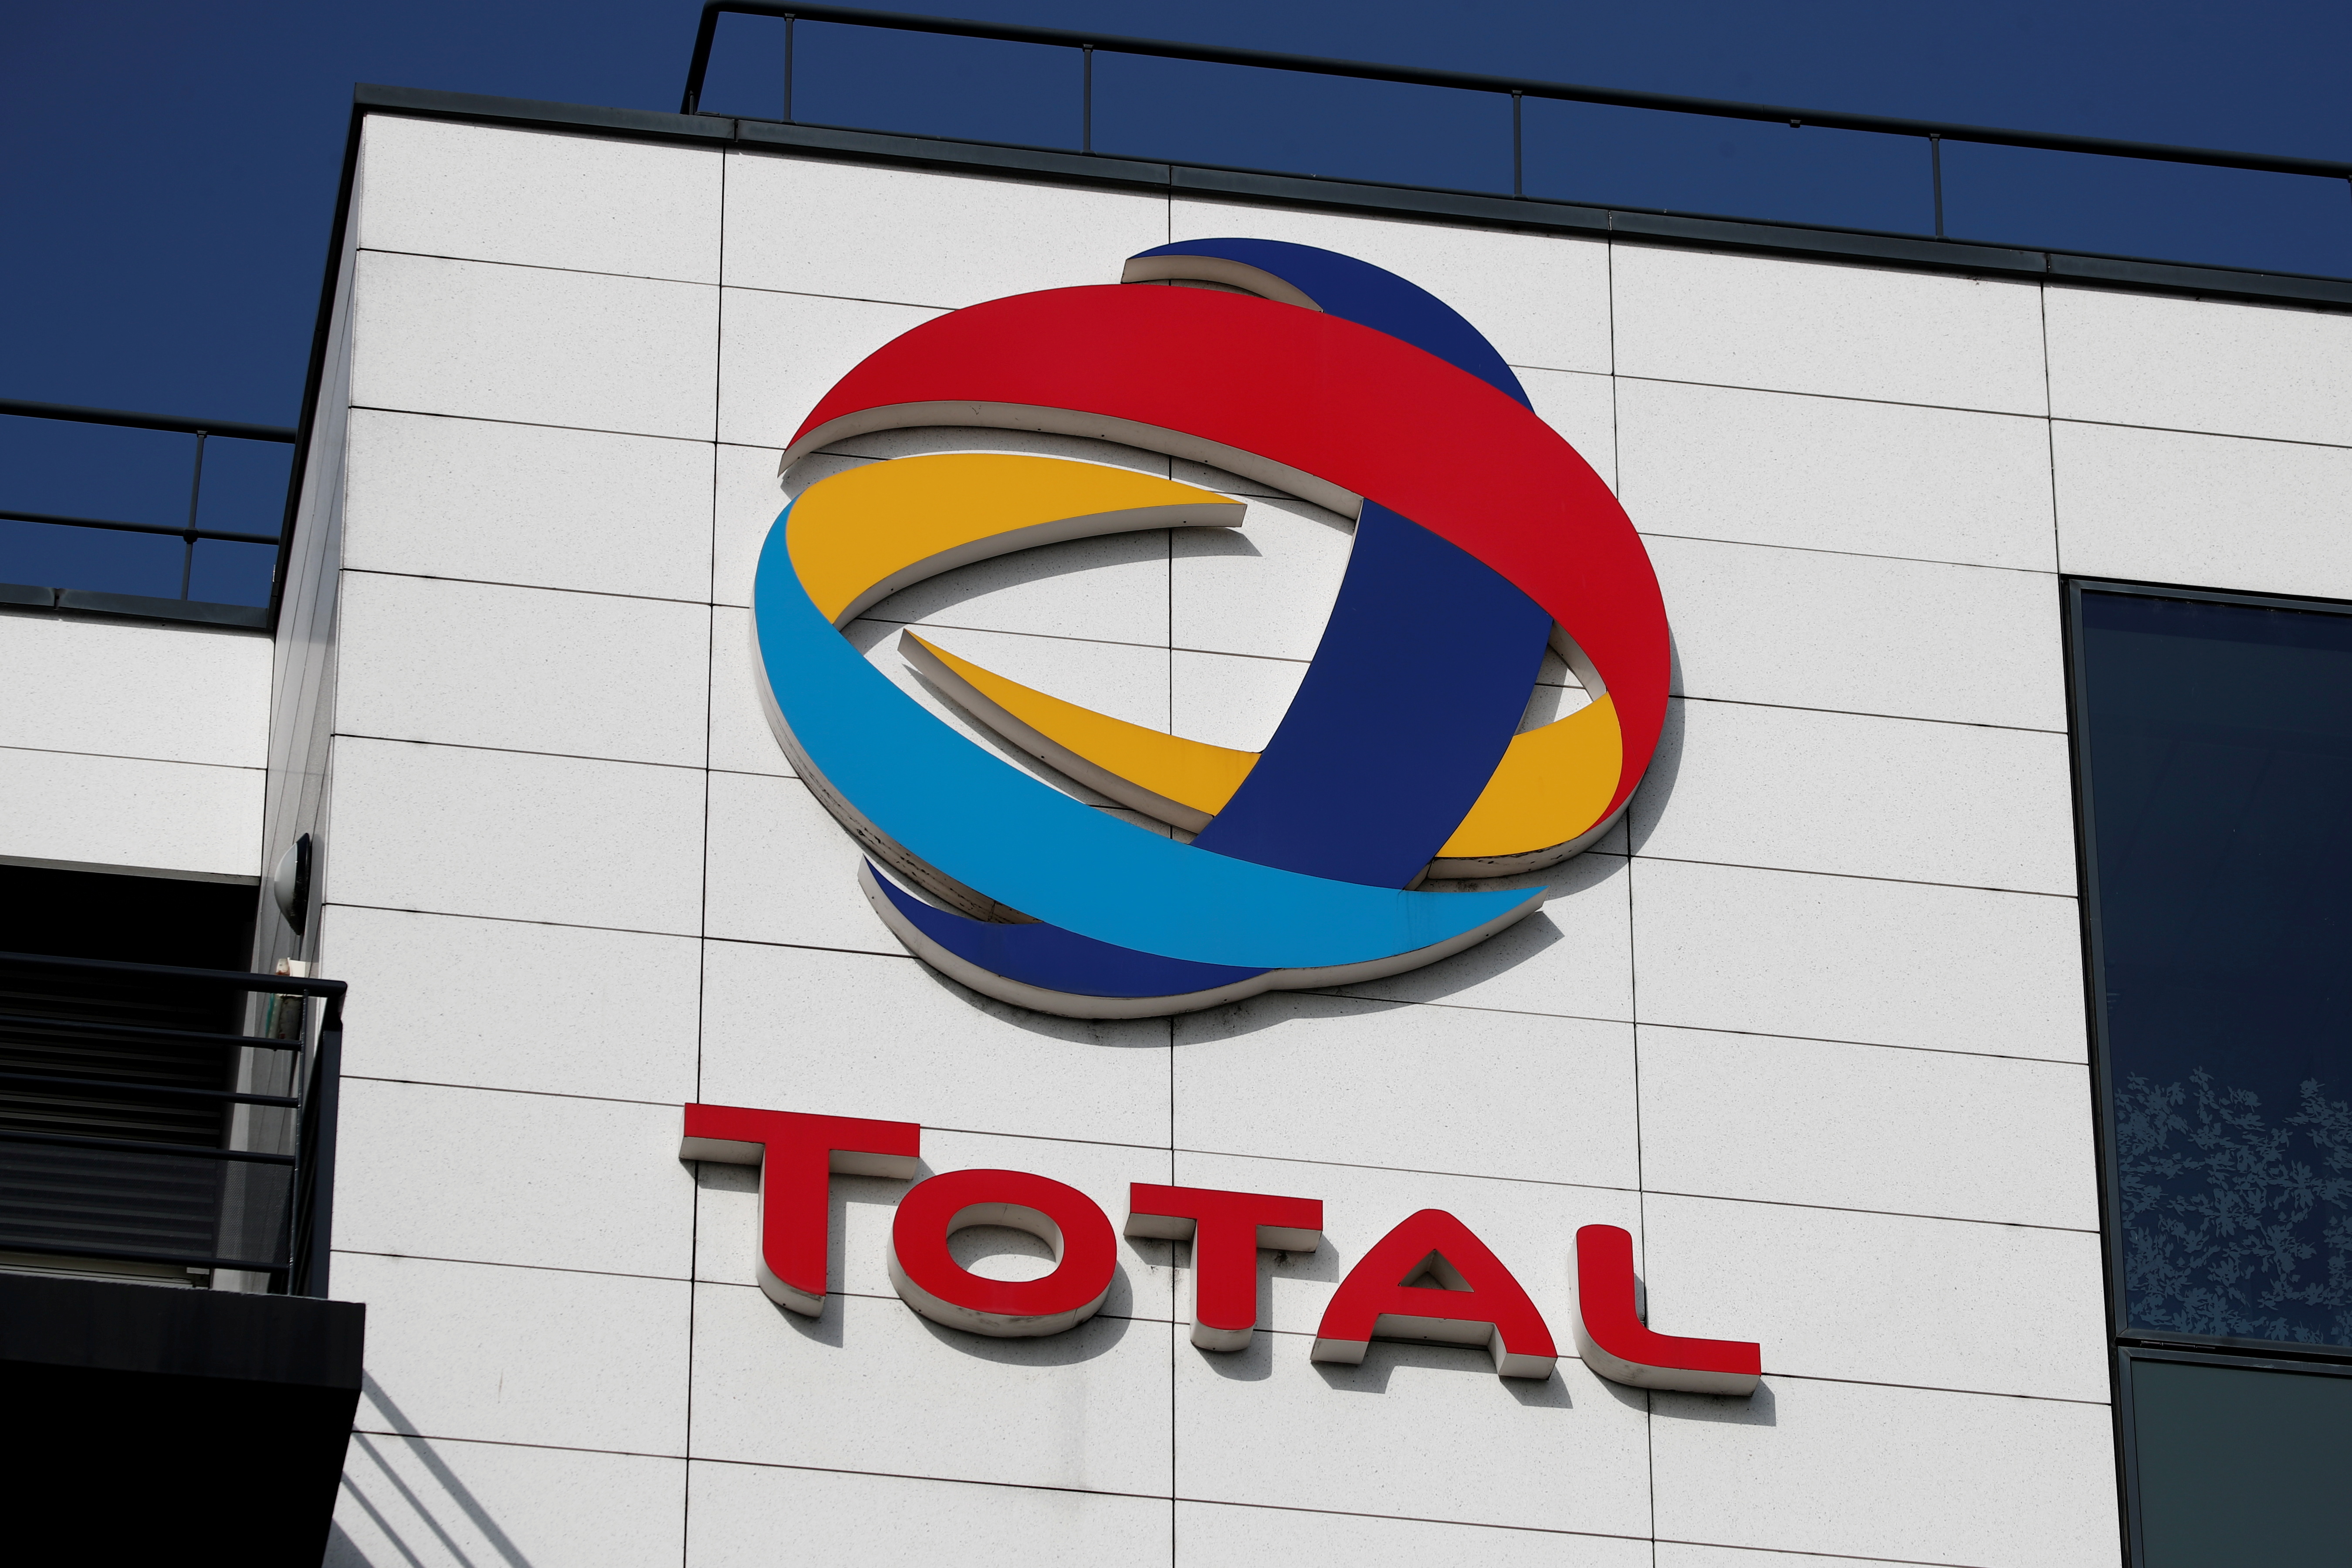 The logo of French oil and gas company Total is seen in Rueil-Malmaison, near Paris, France, March 2, 2021. REUTERS/Benoit Tessier/File Photo